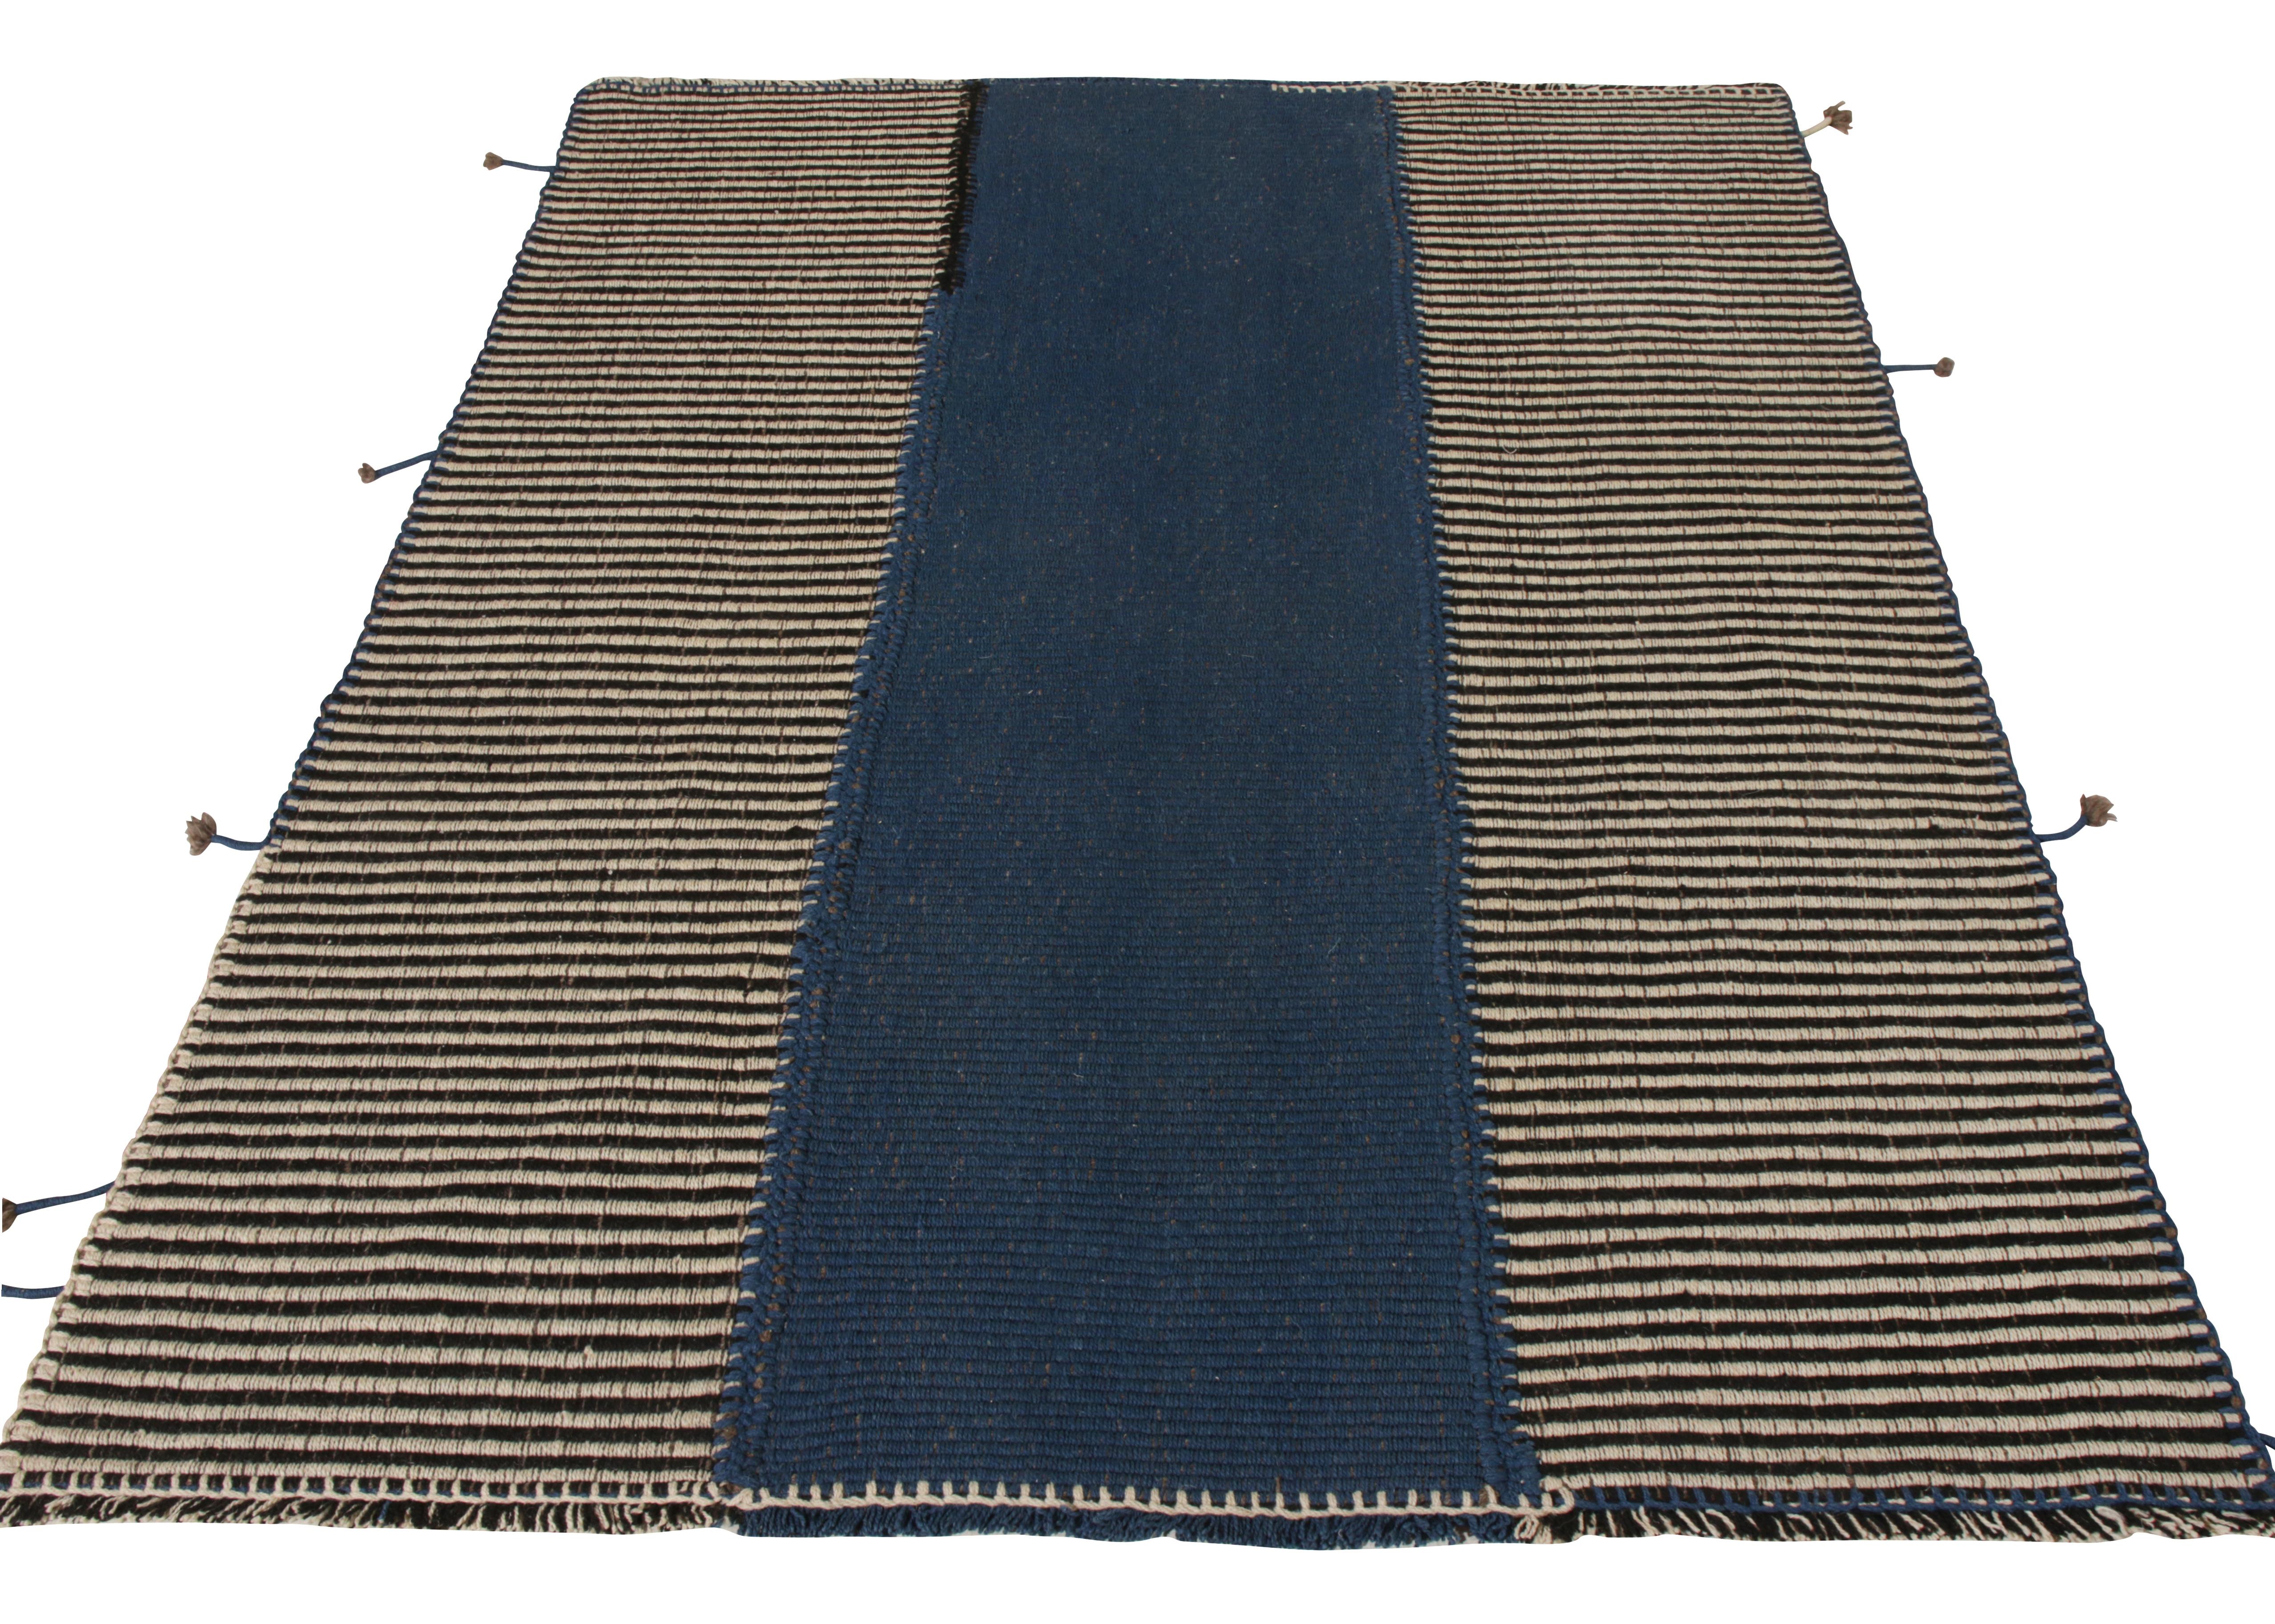 Rug & Kilim introduces a distinctive take on textural Kilims to its collection with this 5x7 addition. Flatwoven in wool in a distinctive paneled style, this modern Kilim features a rare marriage of technique and striation on panels in lush